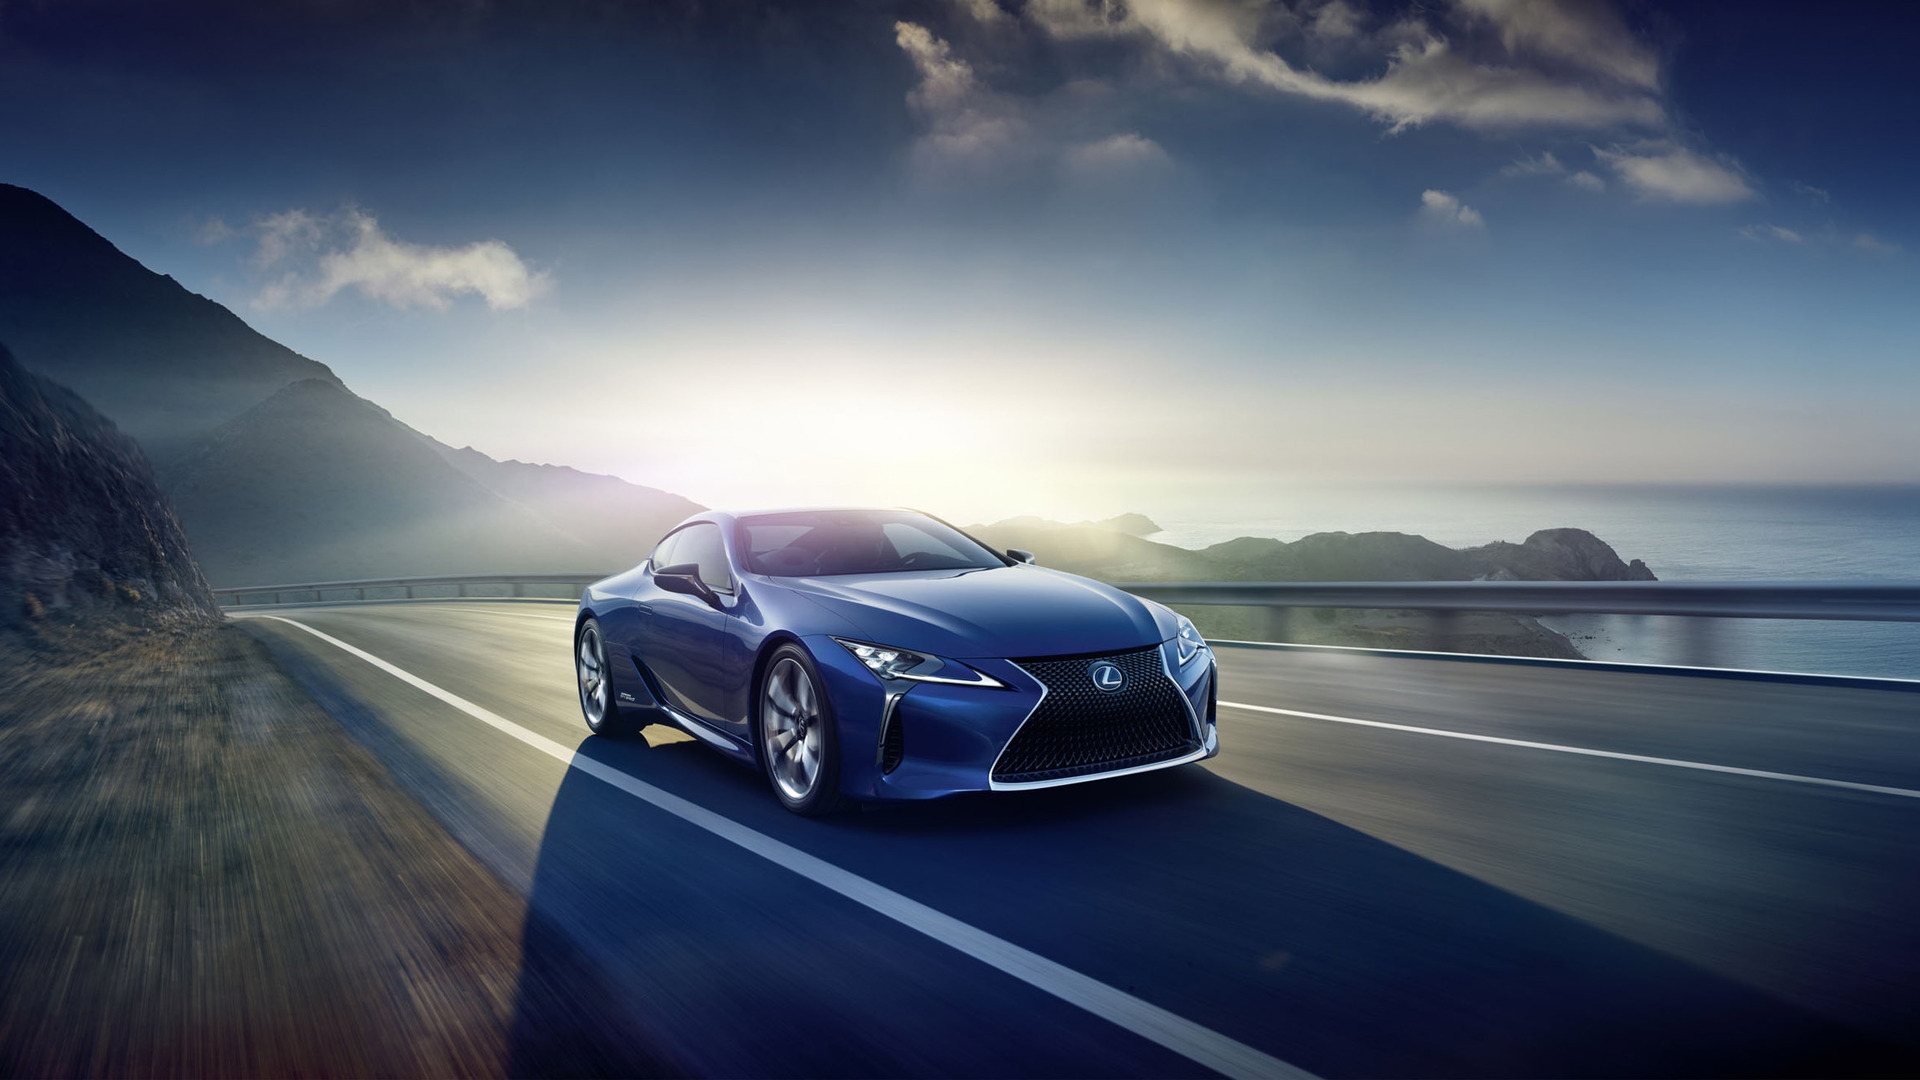 2016 Lexus LC 500h Coupe for 1920 x 1080 HDTV 1080p resolution